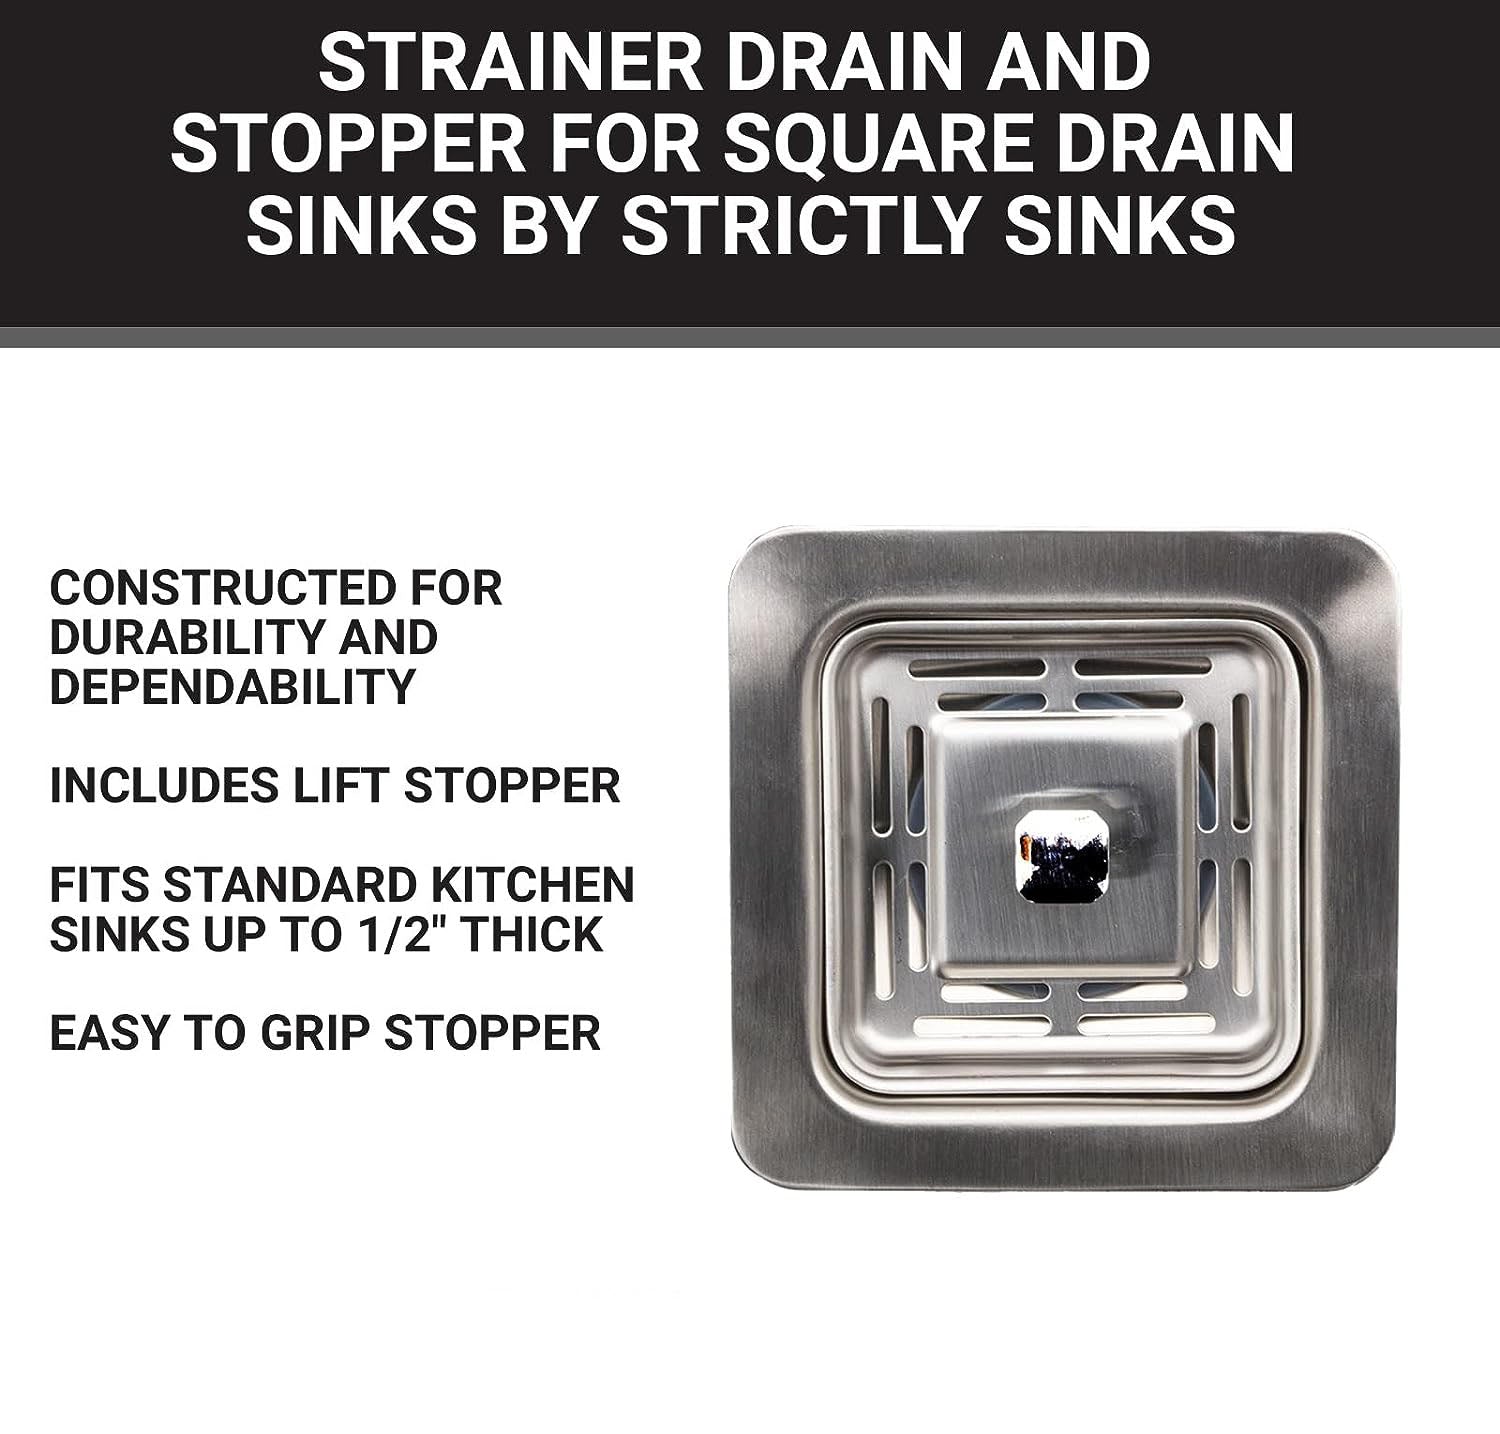 Sinks Stainless Steel Sink Strainer for Kitchen Sink - Stain Resistant Kitchen Sink Strainer with Large Collection Basket Sink Drain Strainer for All Square Drain Sinks (Silver) Fossa Home